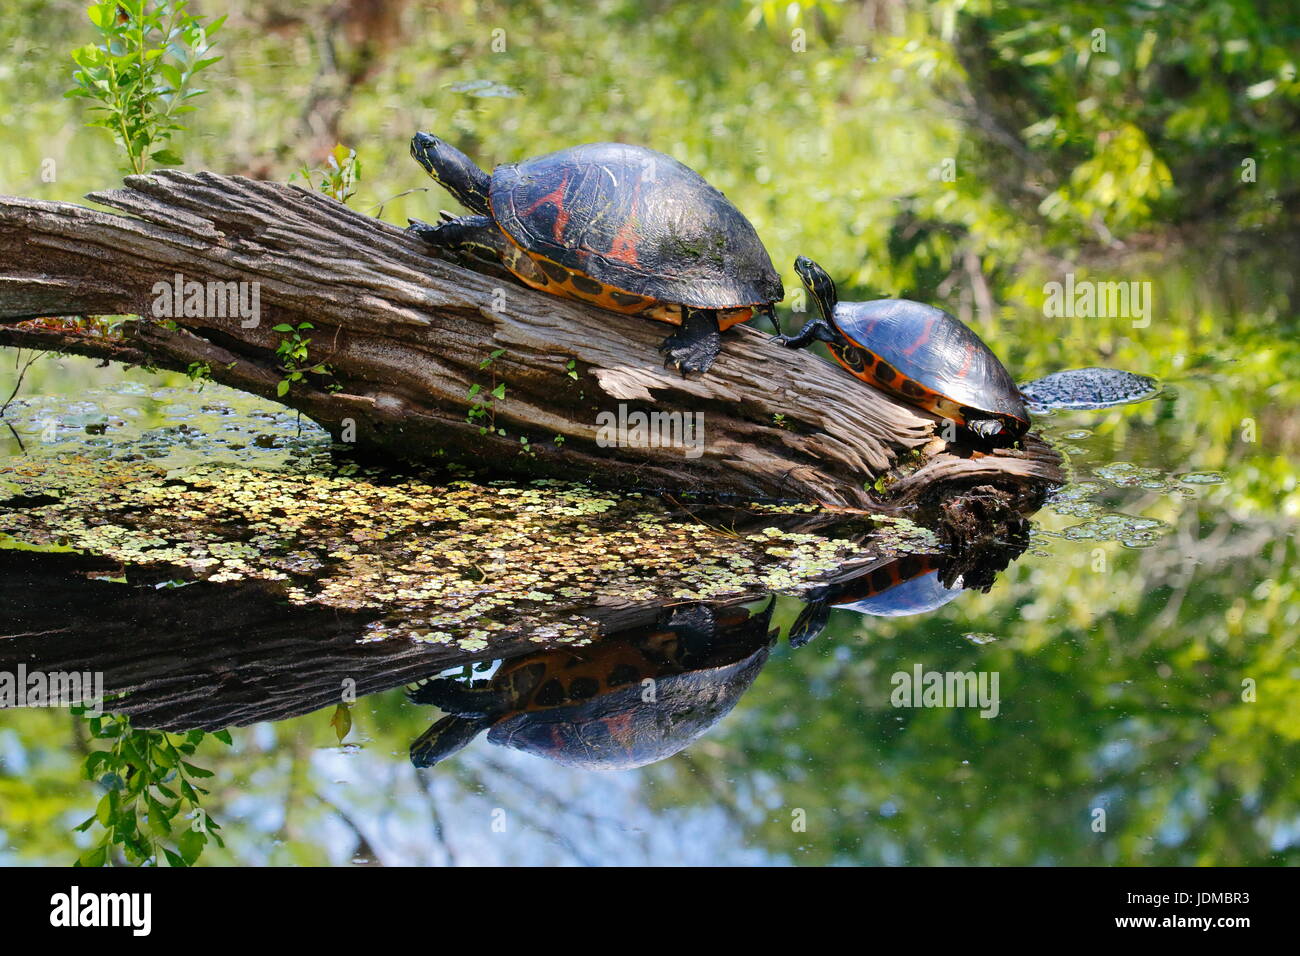 Florida red bellied cooters, Pseudemys nelsoni, on a log. Stock Photo